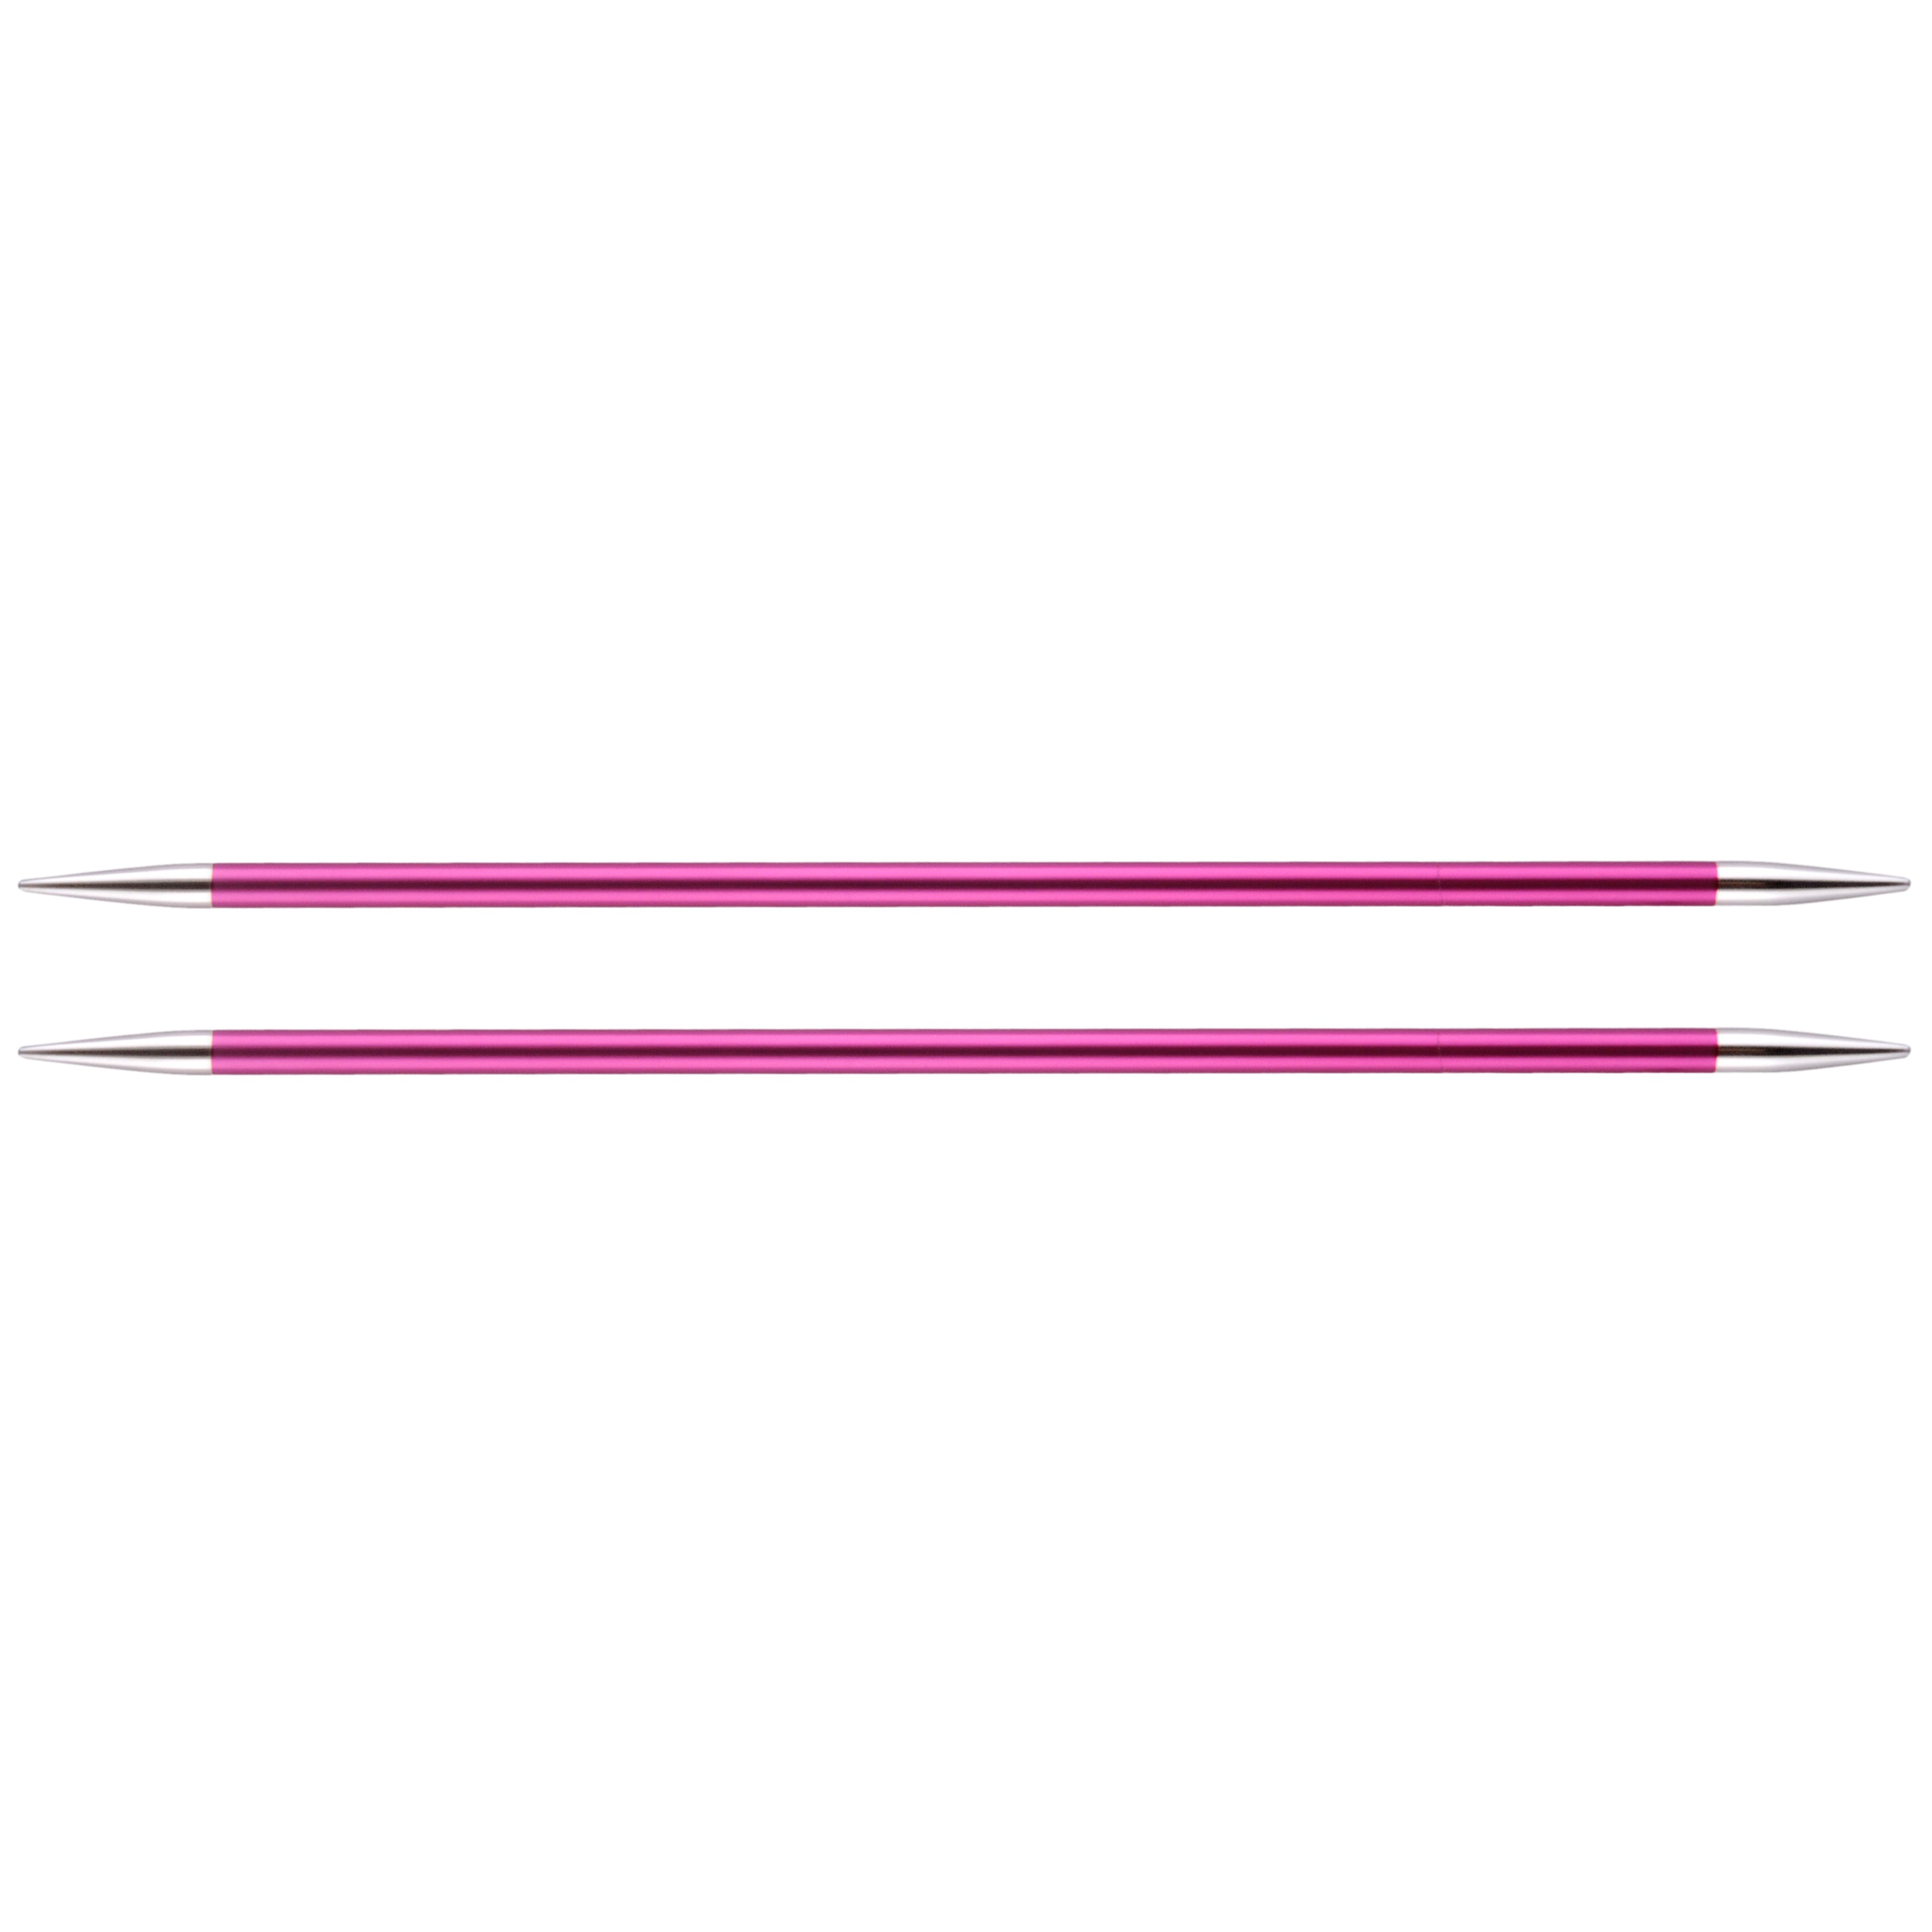 KnitPro Double Point Knitting Needles (Pack of 5) - Zing - 20cm